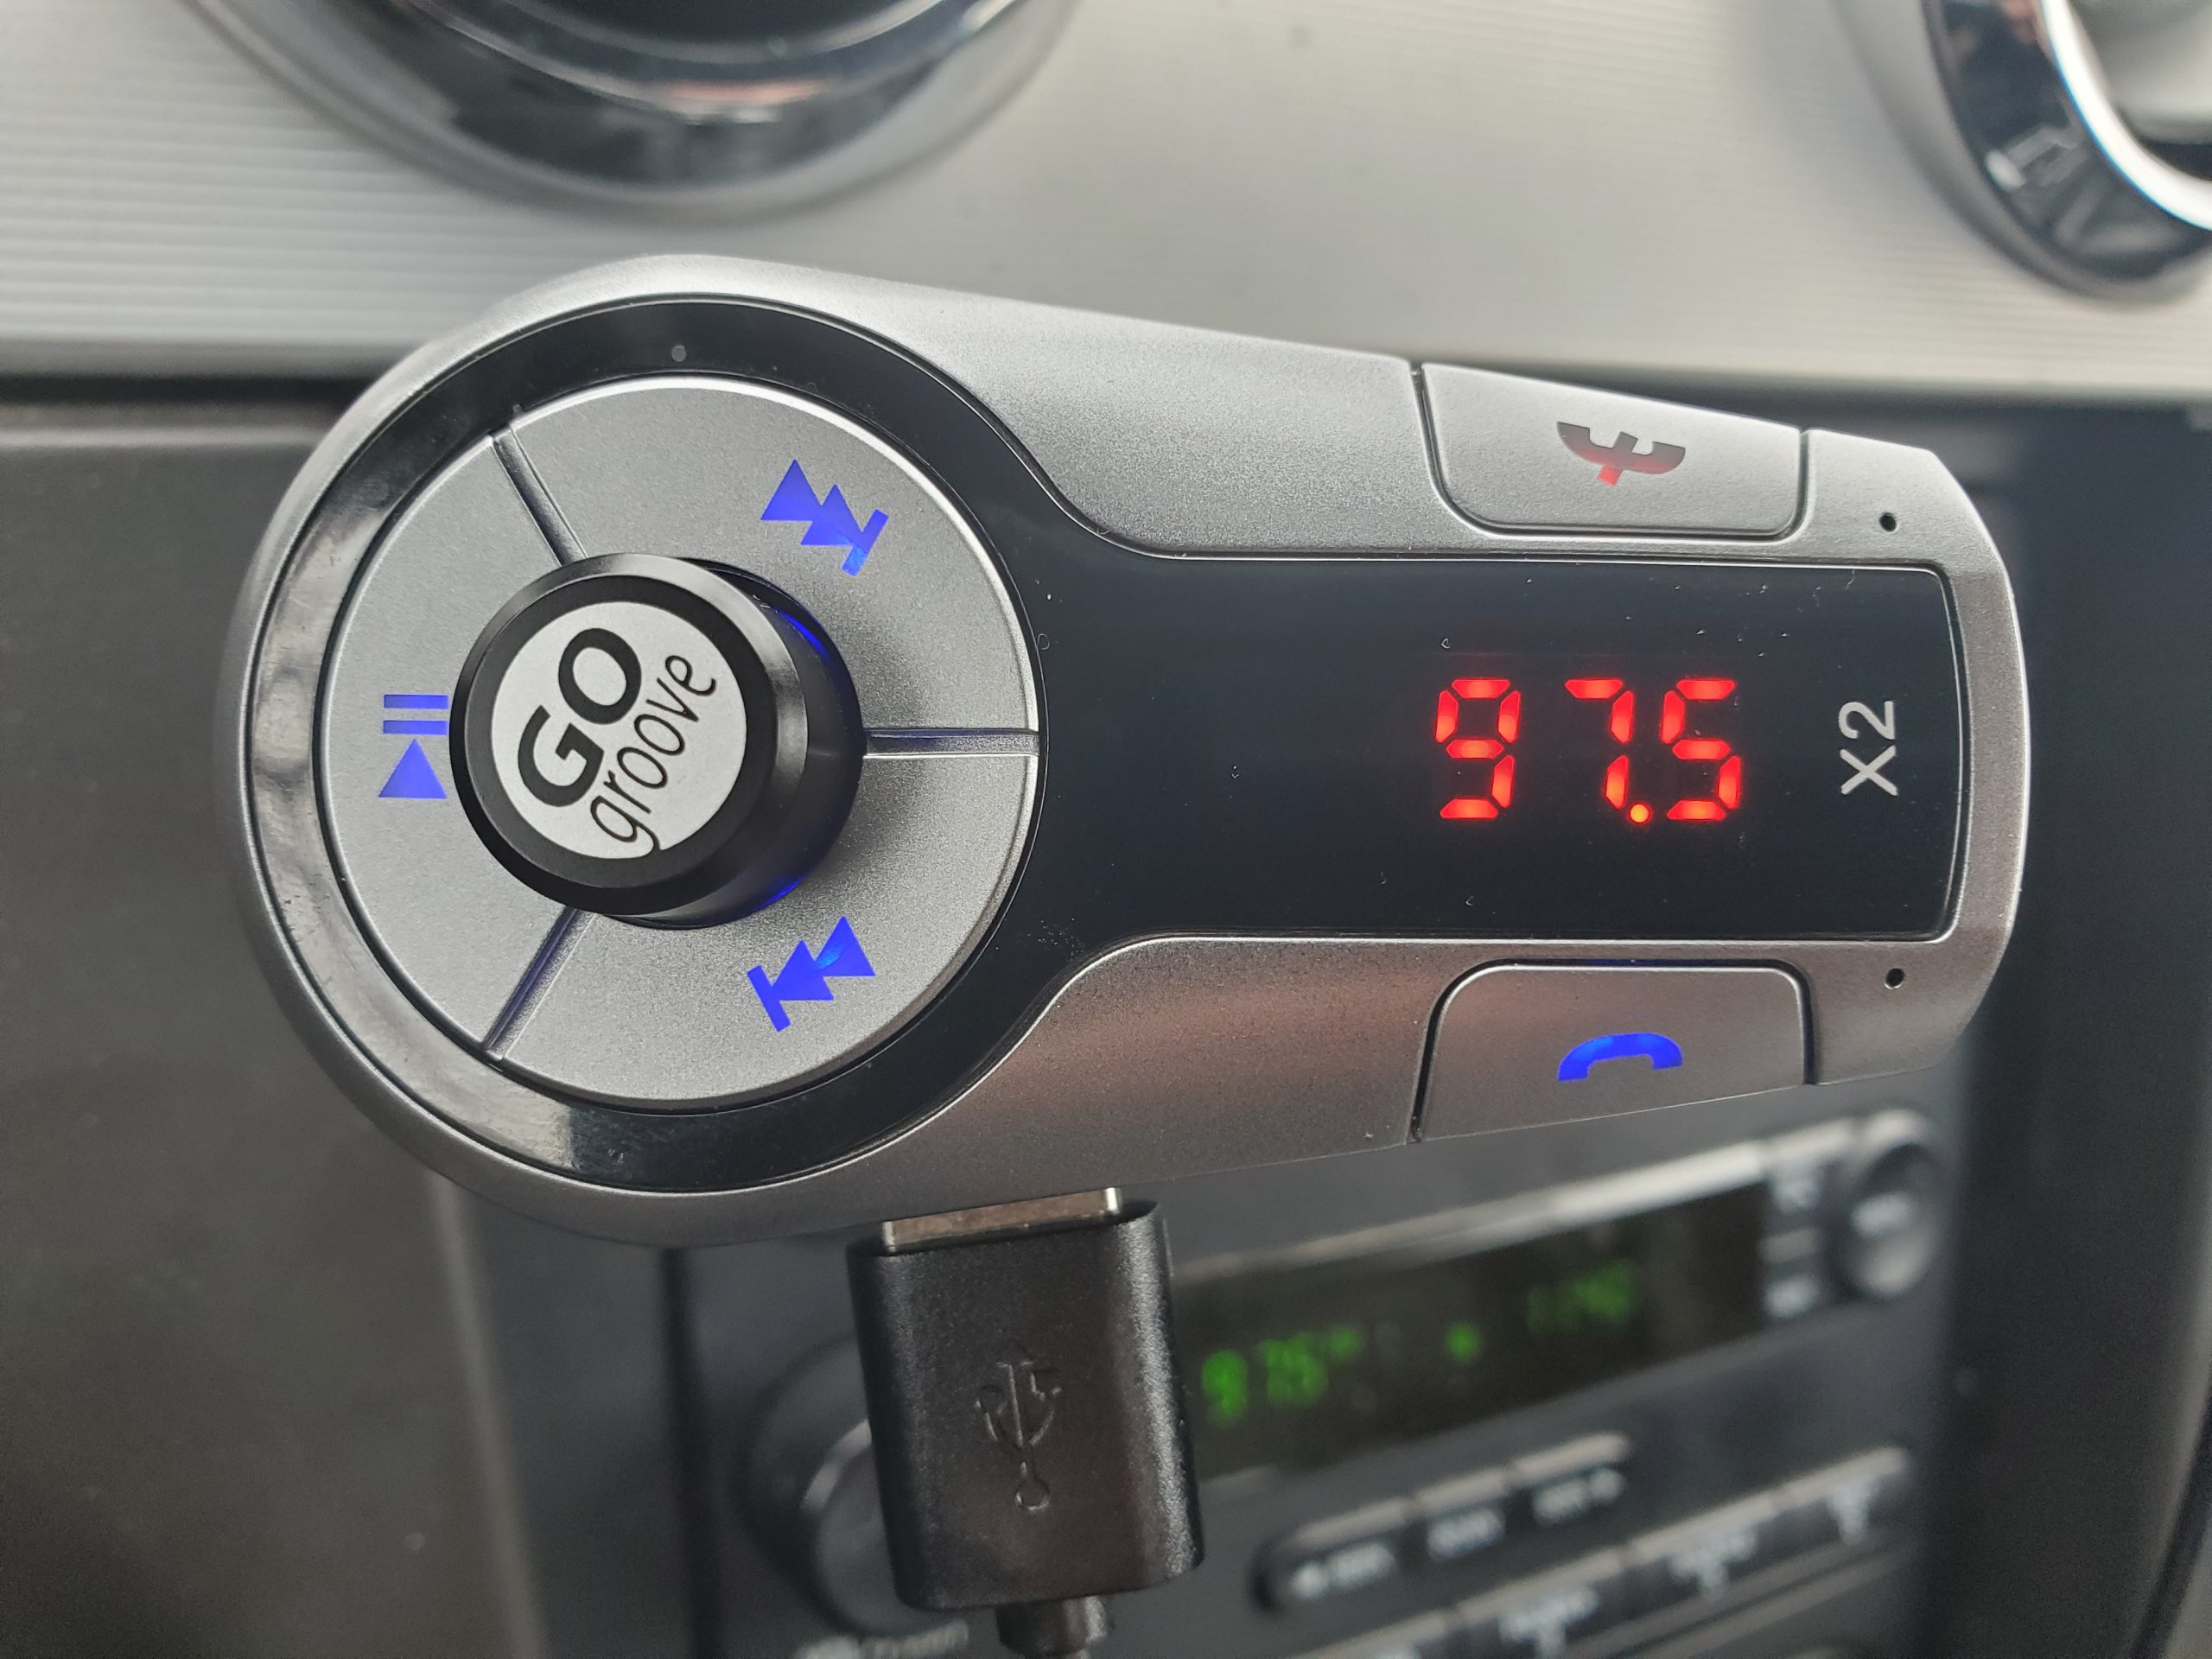 GoGroove Flexsmart X2 Review, a close-up of the FM transmitter.